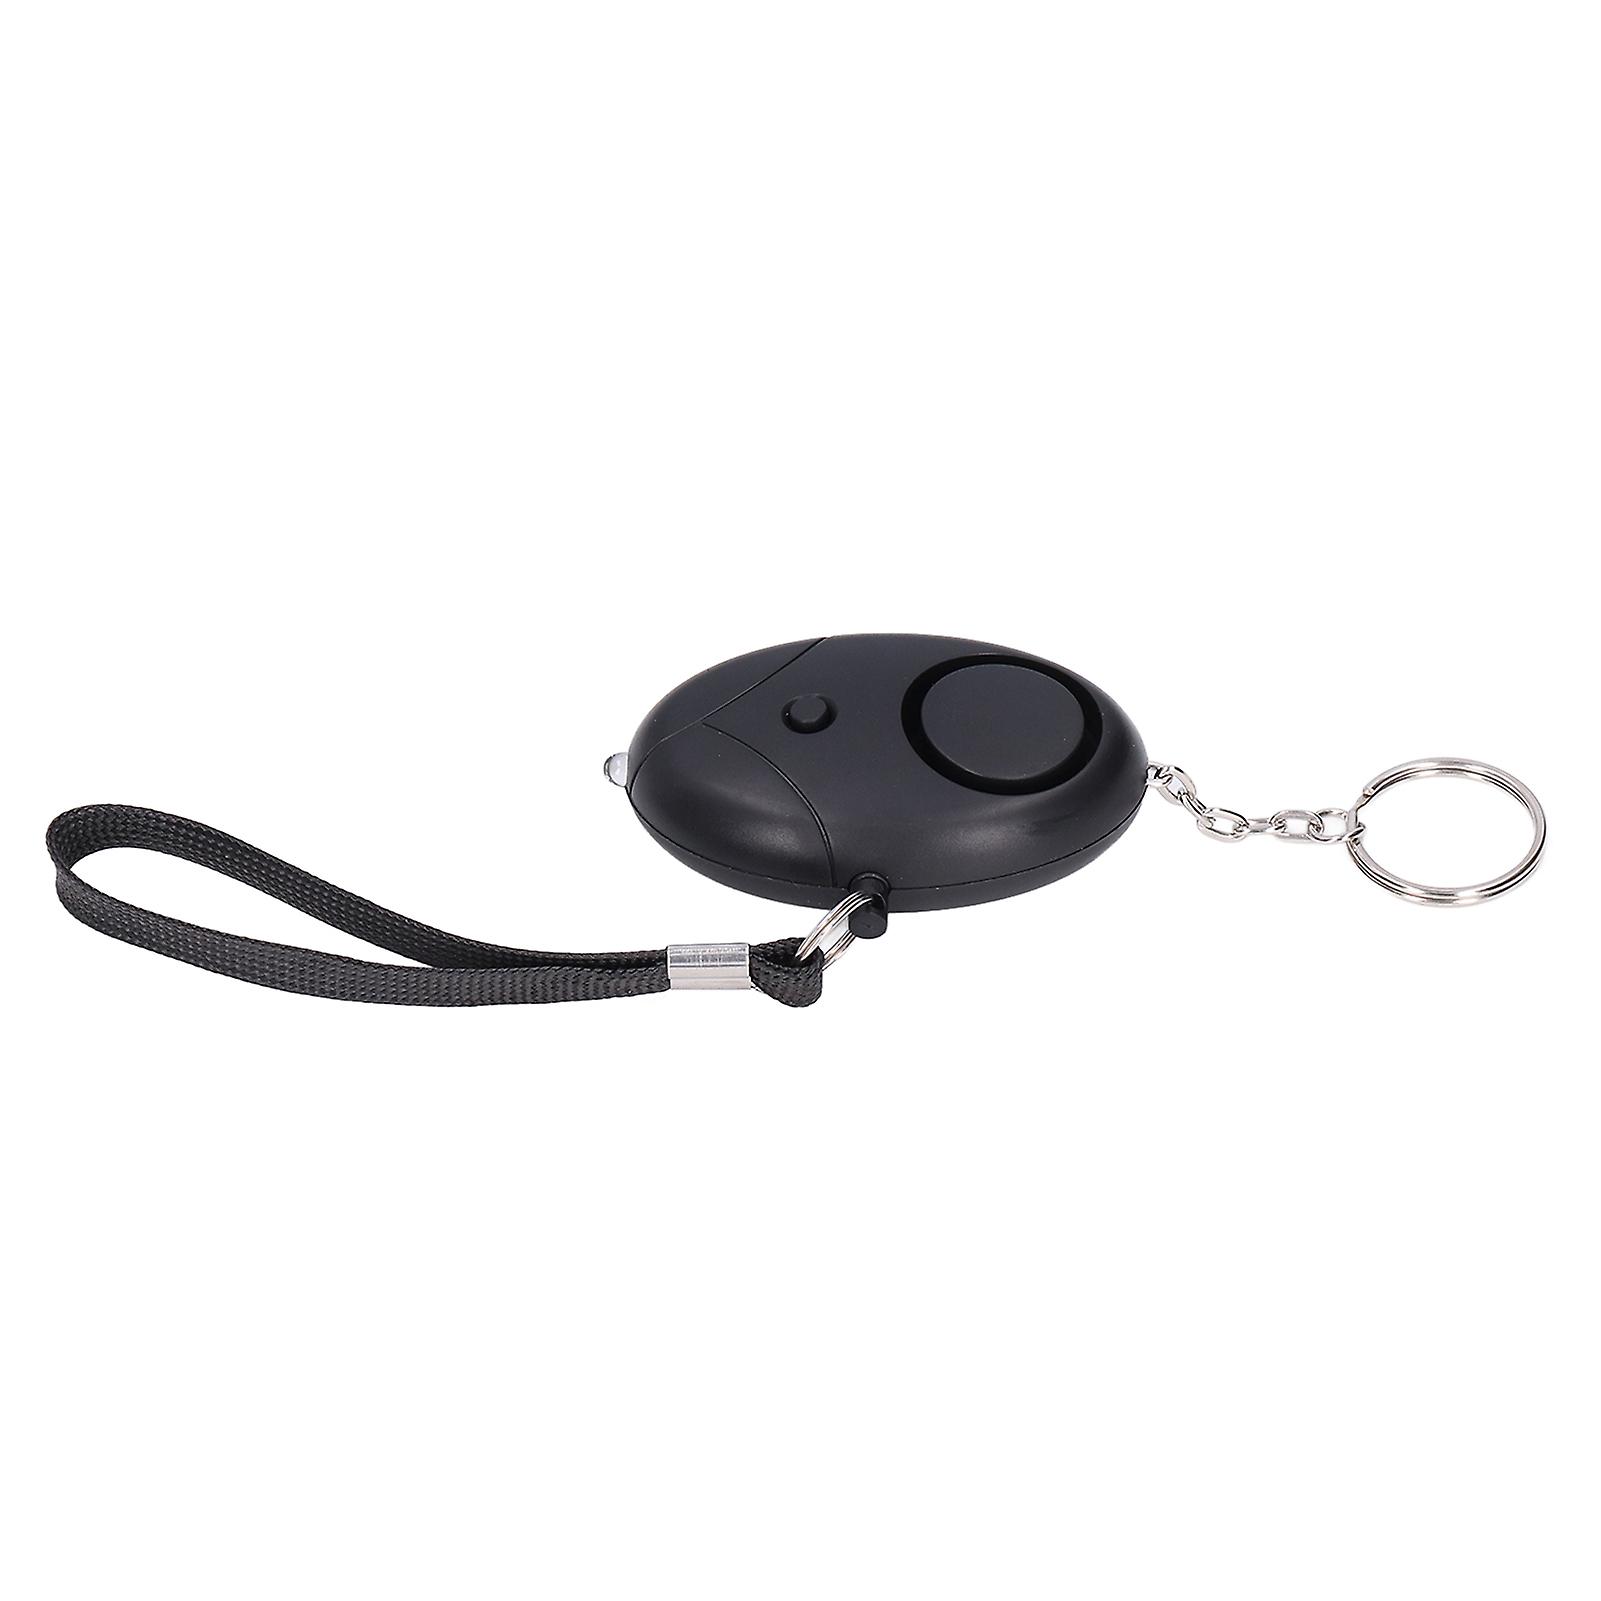 Emergency Alarm 130db Very Loudly Security Self Defense Electronic Device With Key Chain For Hiking Camping